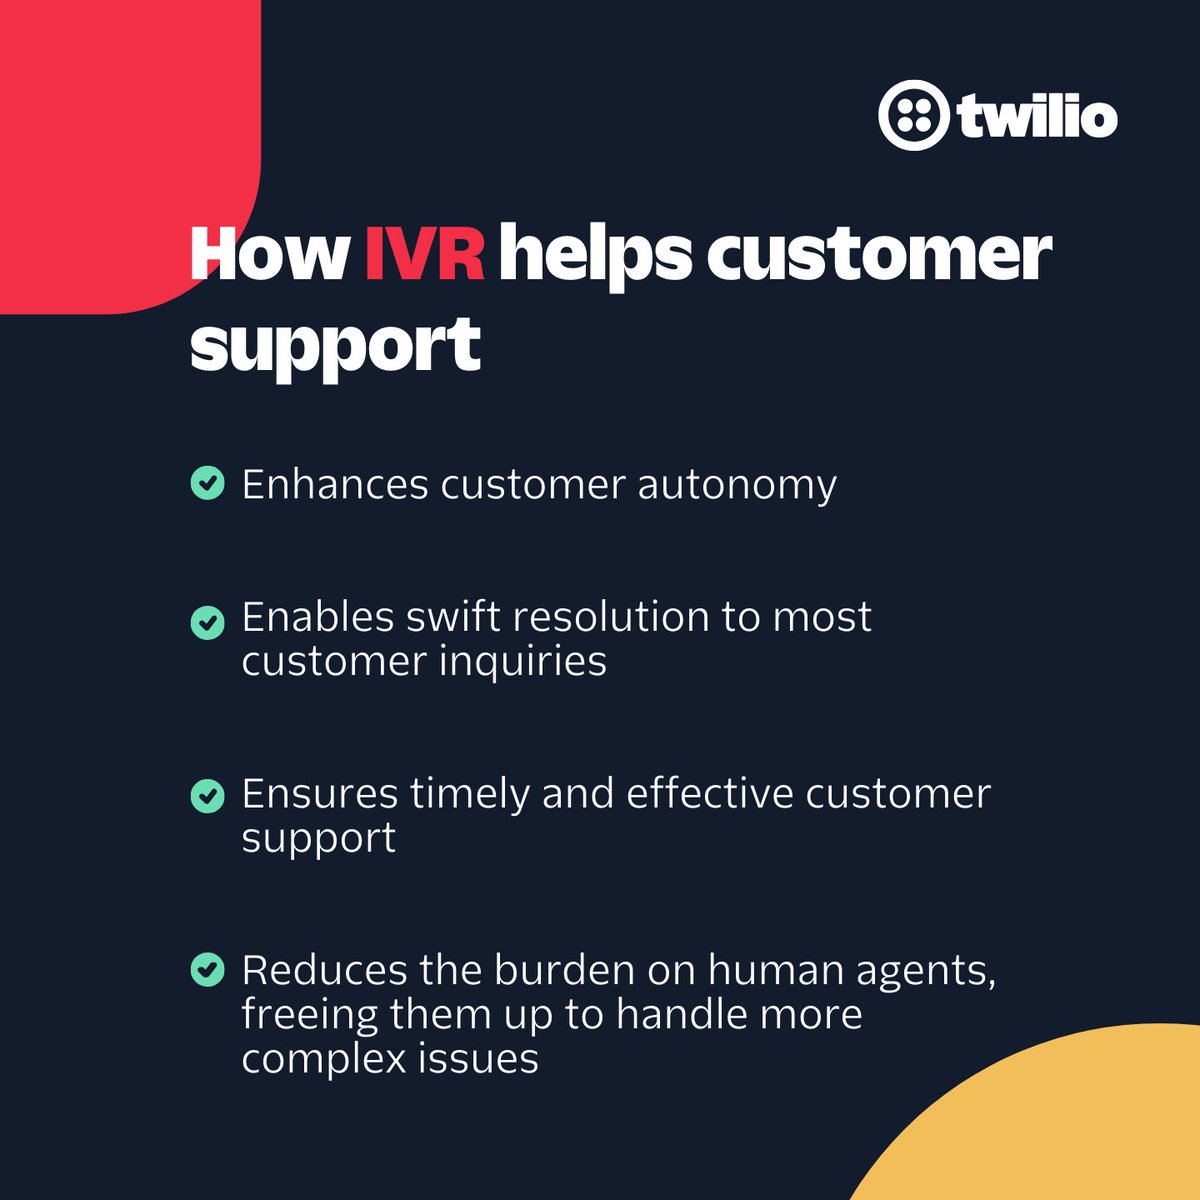 Interactive voice response (IVR) does more than help alleviate long call wait times; it can deliver a streamlined and personalized experience. Here are some tips for modernizing yours. → bit.ly/3PTB6Sz